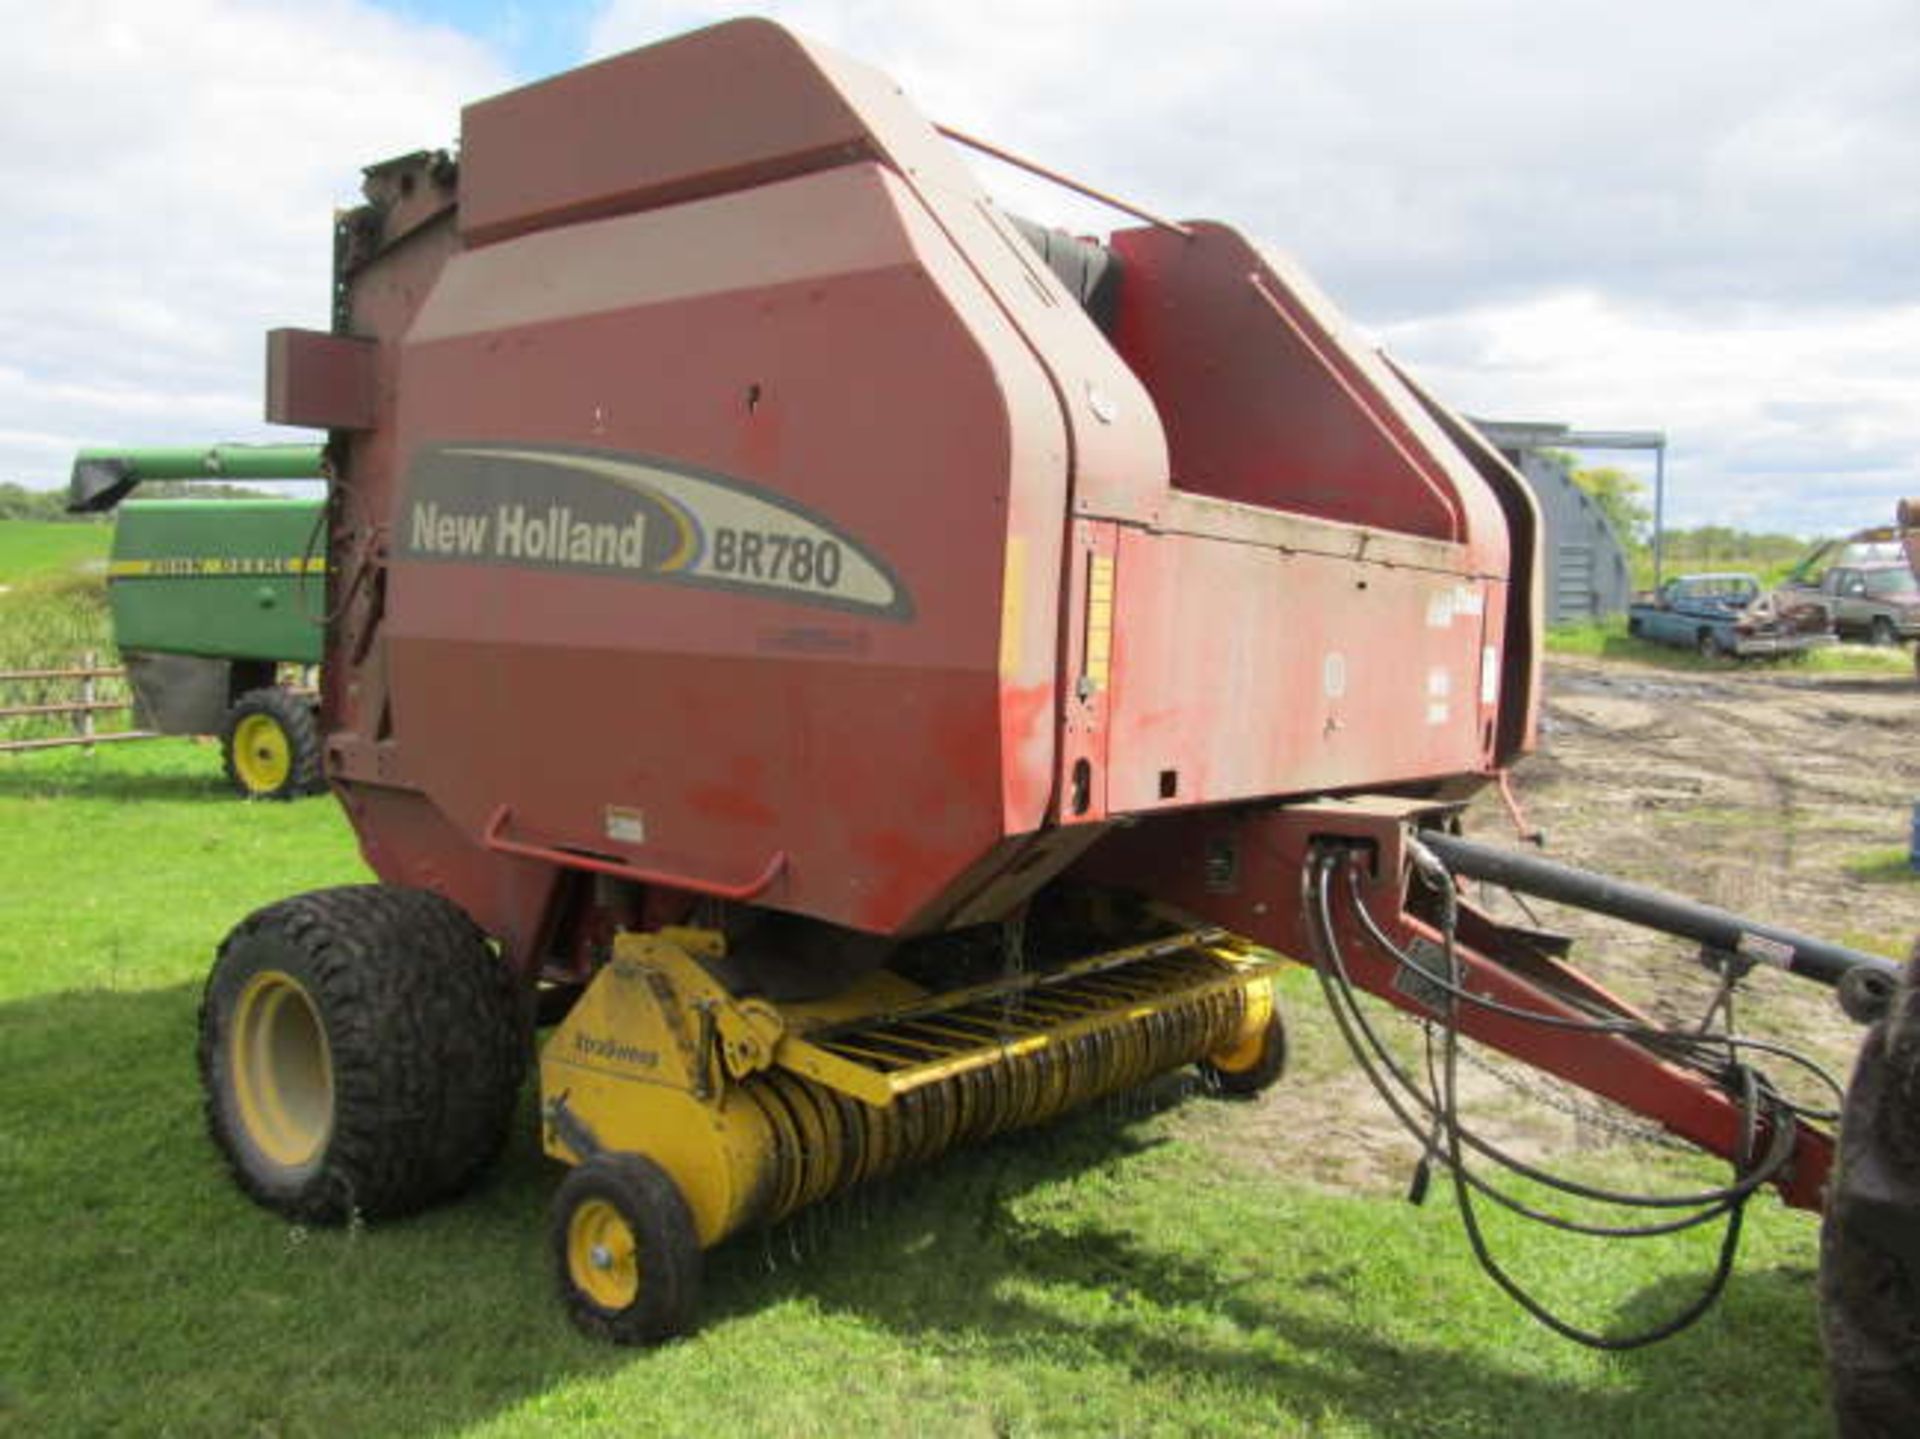 NEW HOLLAND BR780 ROUND BALER; Twine Wrap, Mega Wide Pick-up, SN.61109 (Worley) C-1 - Image 5 of 5